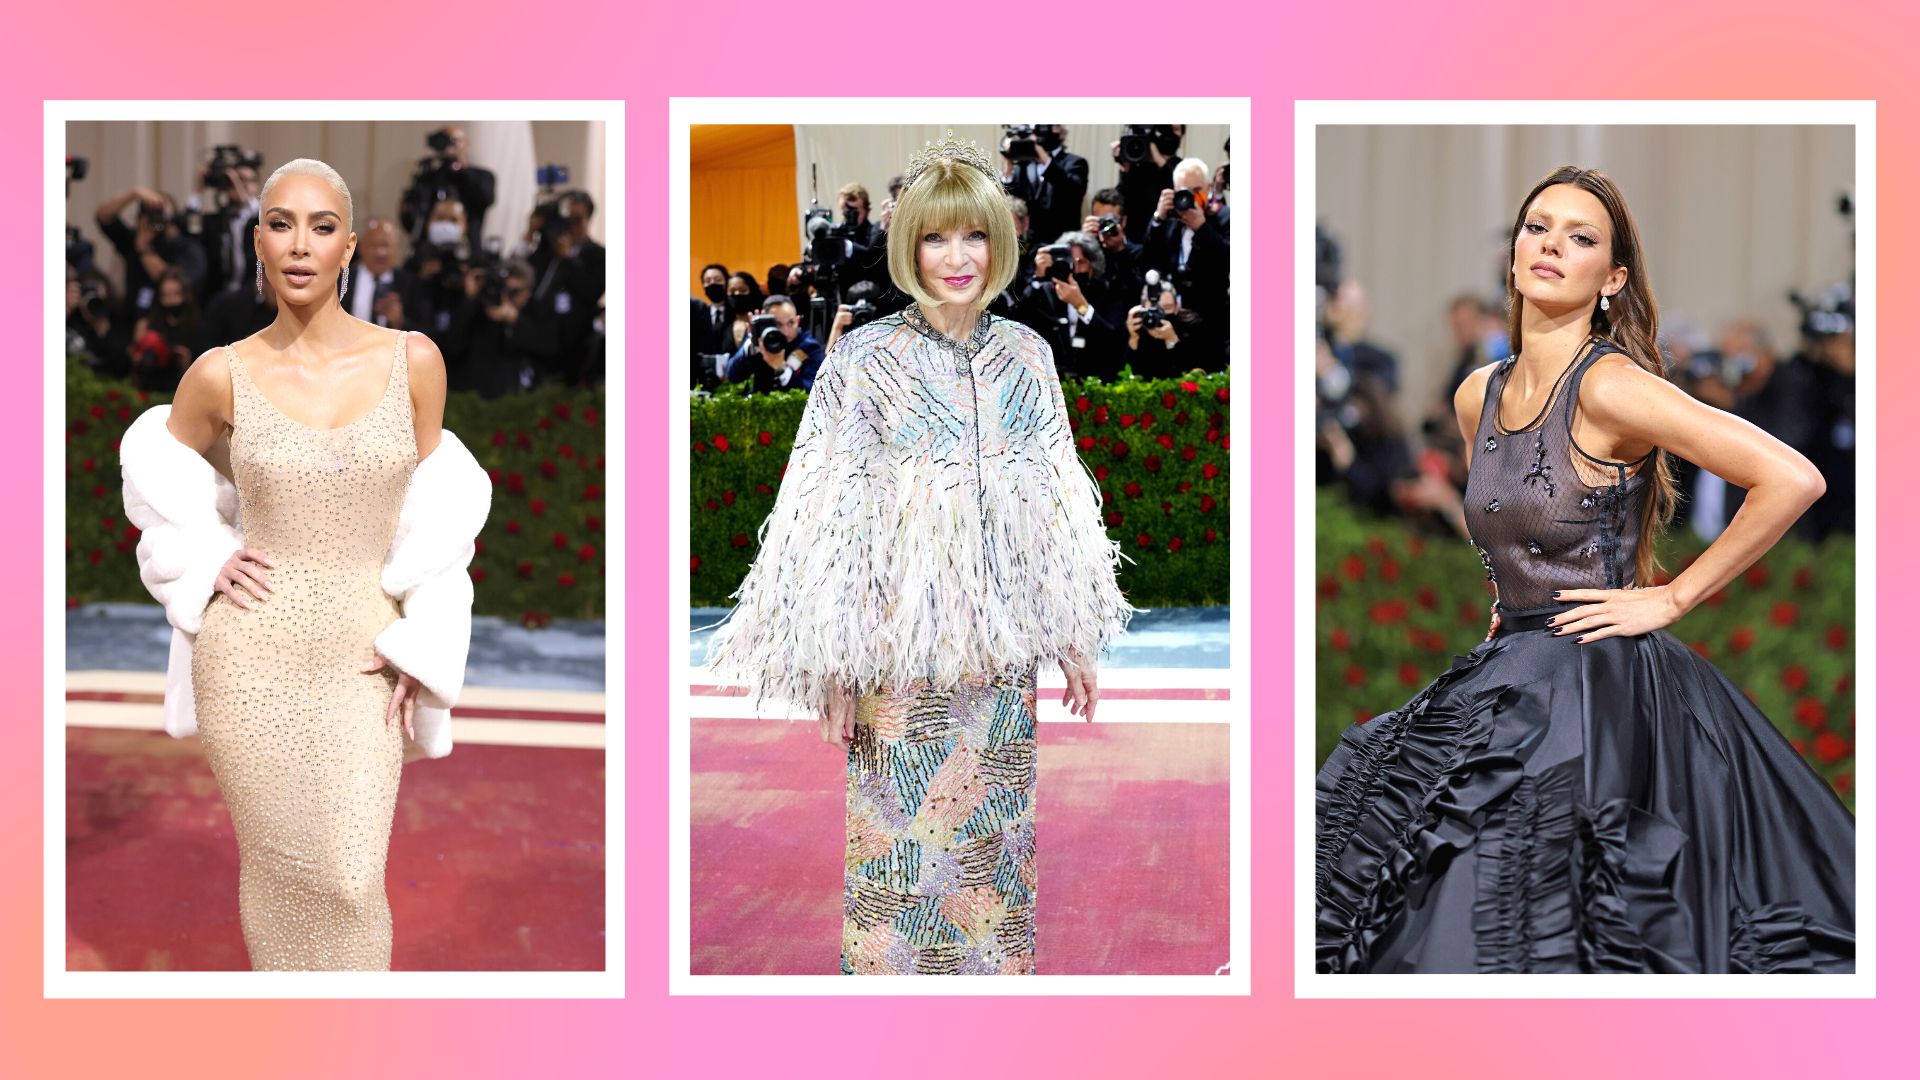 Met Gala 2023: Date, Co-chairs And Dress Code Announced For Event ...